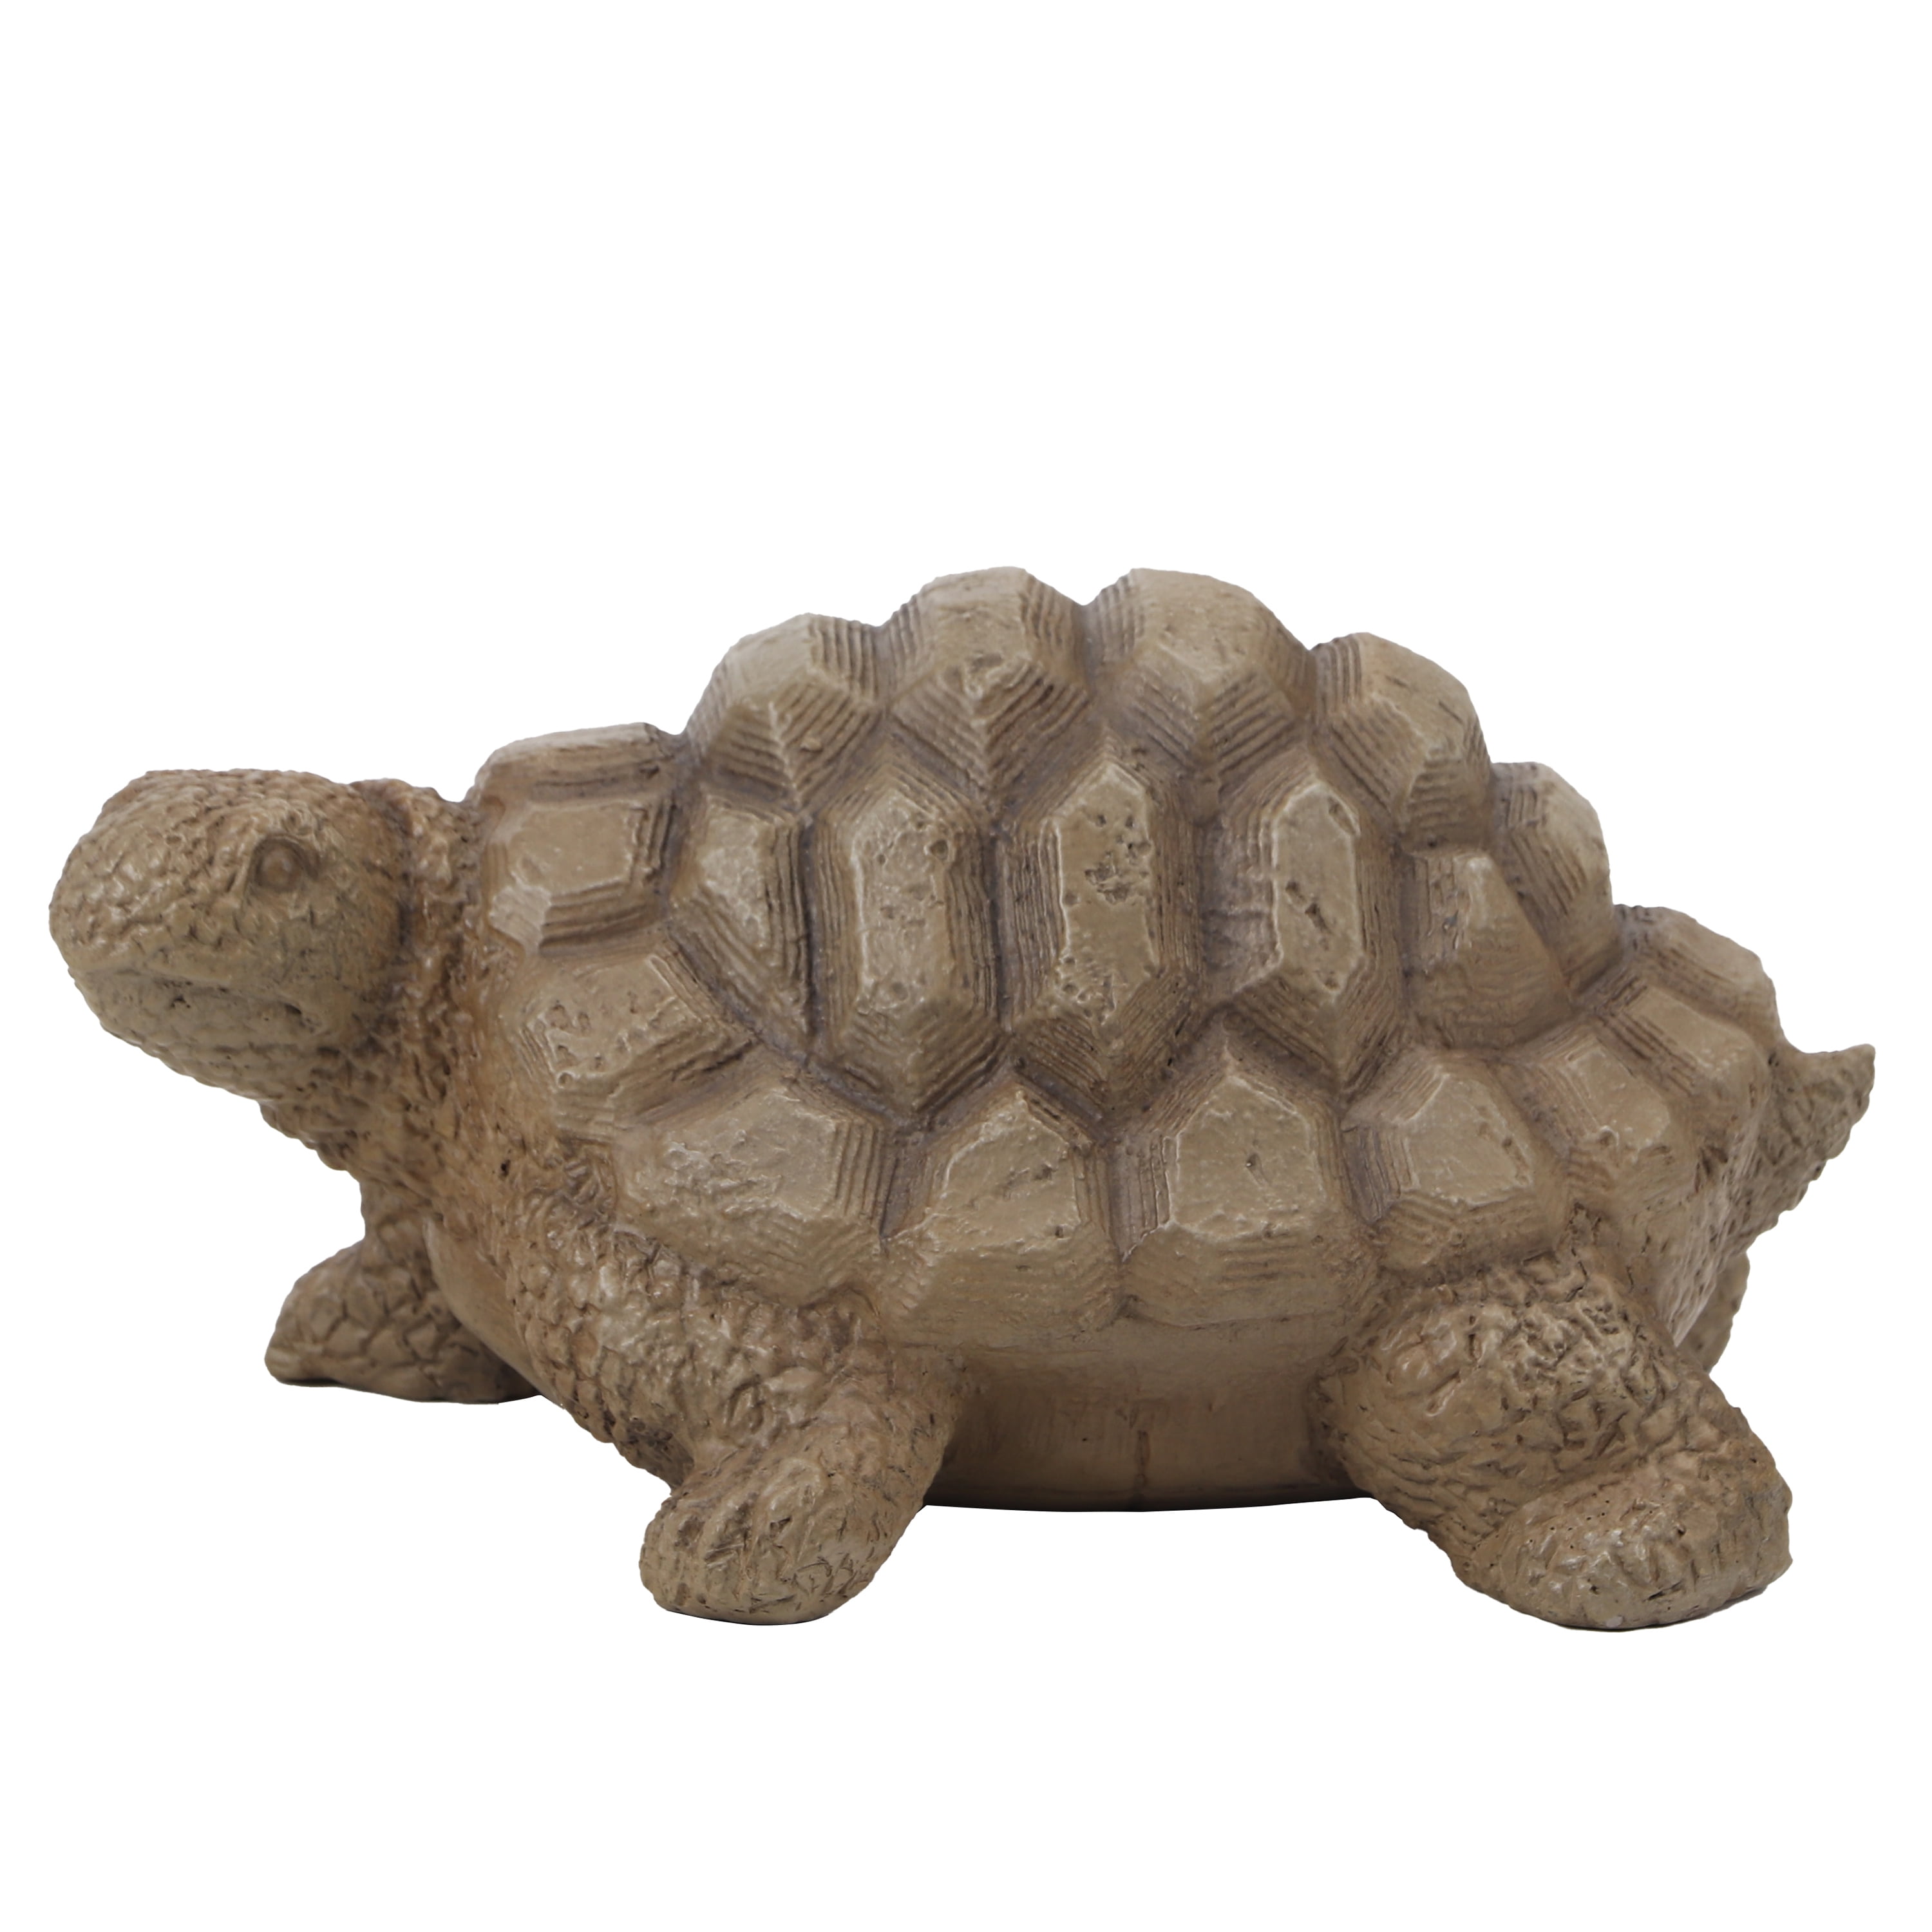 Better Homes & Gardens Natural Turtle Statue, 9.3 in L x 6.5 in W x 4.75 in H